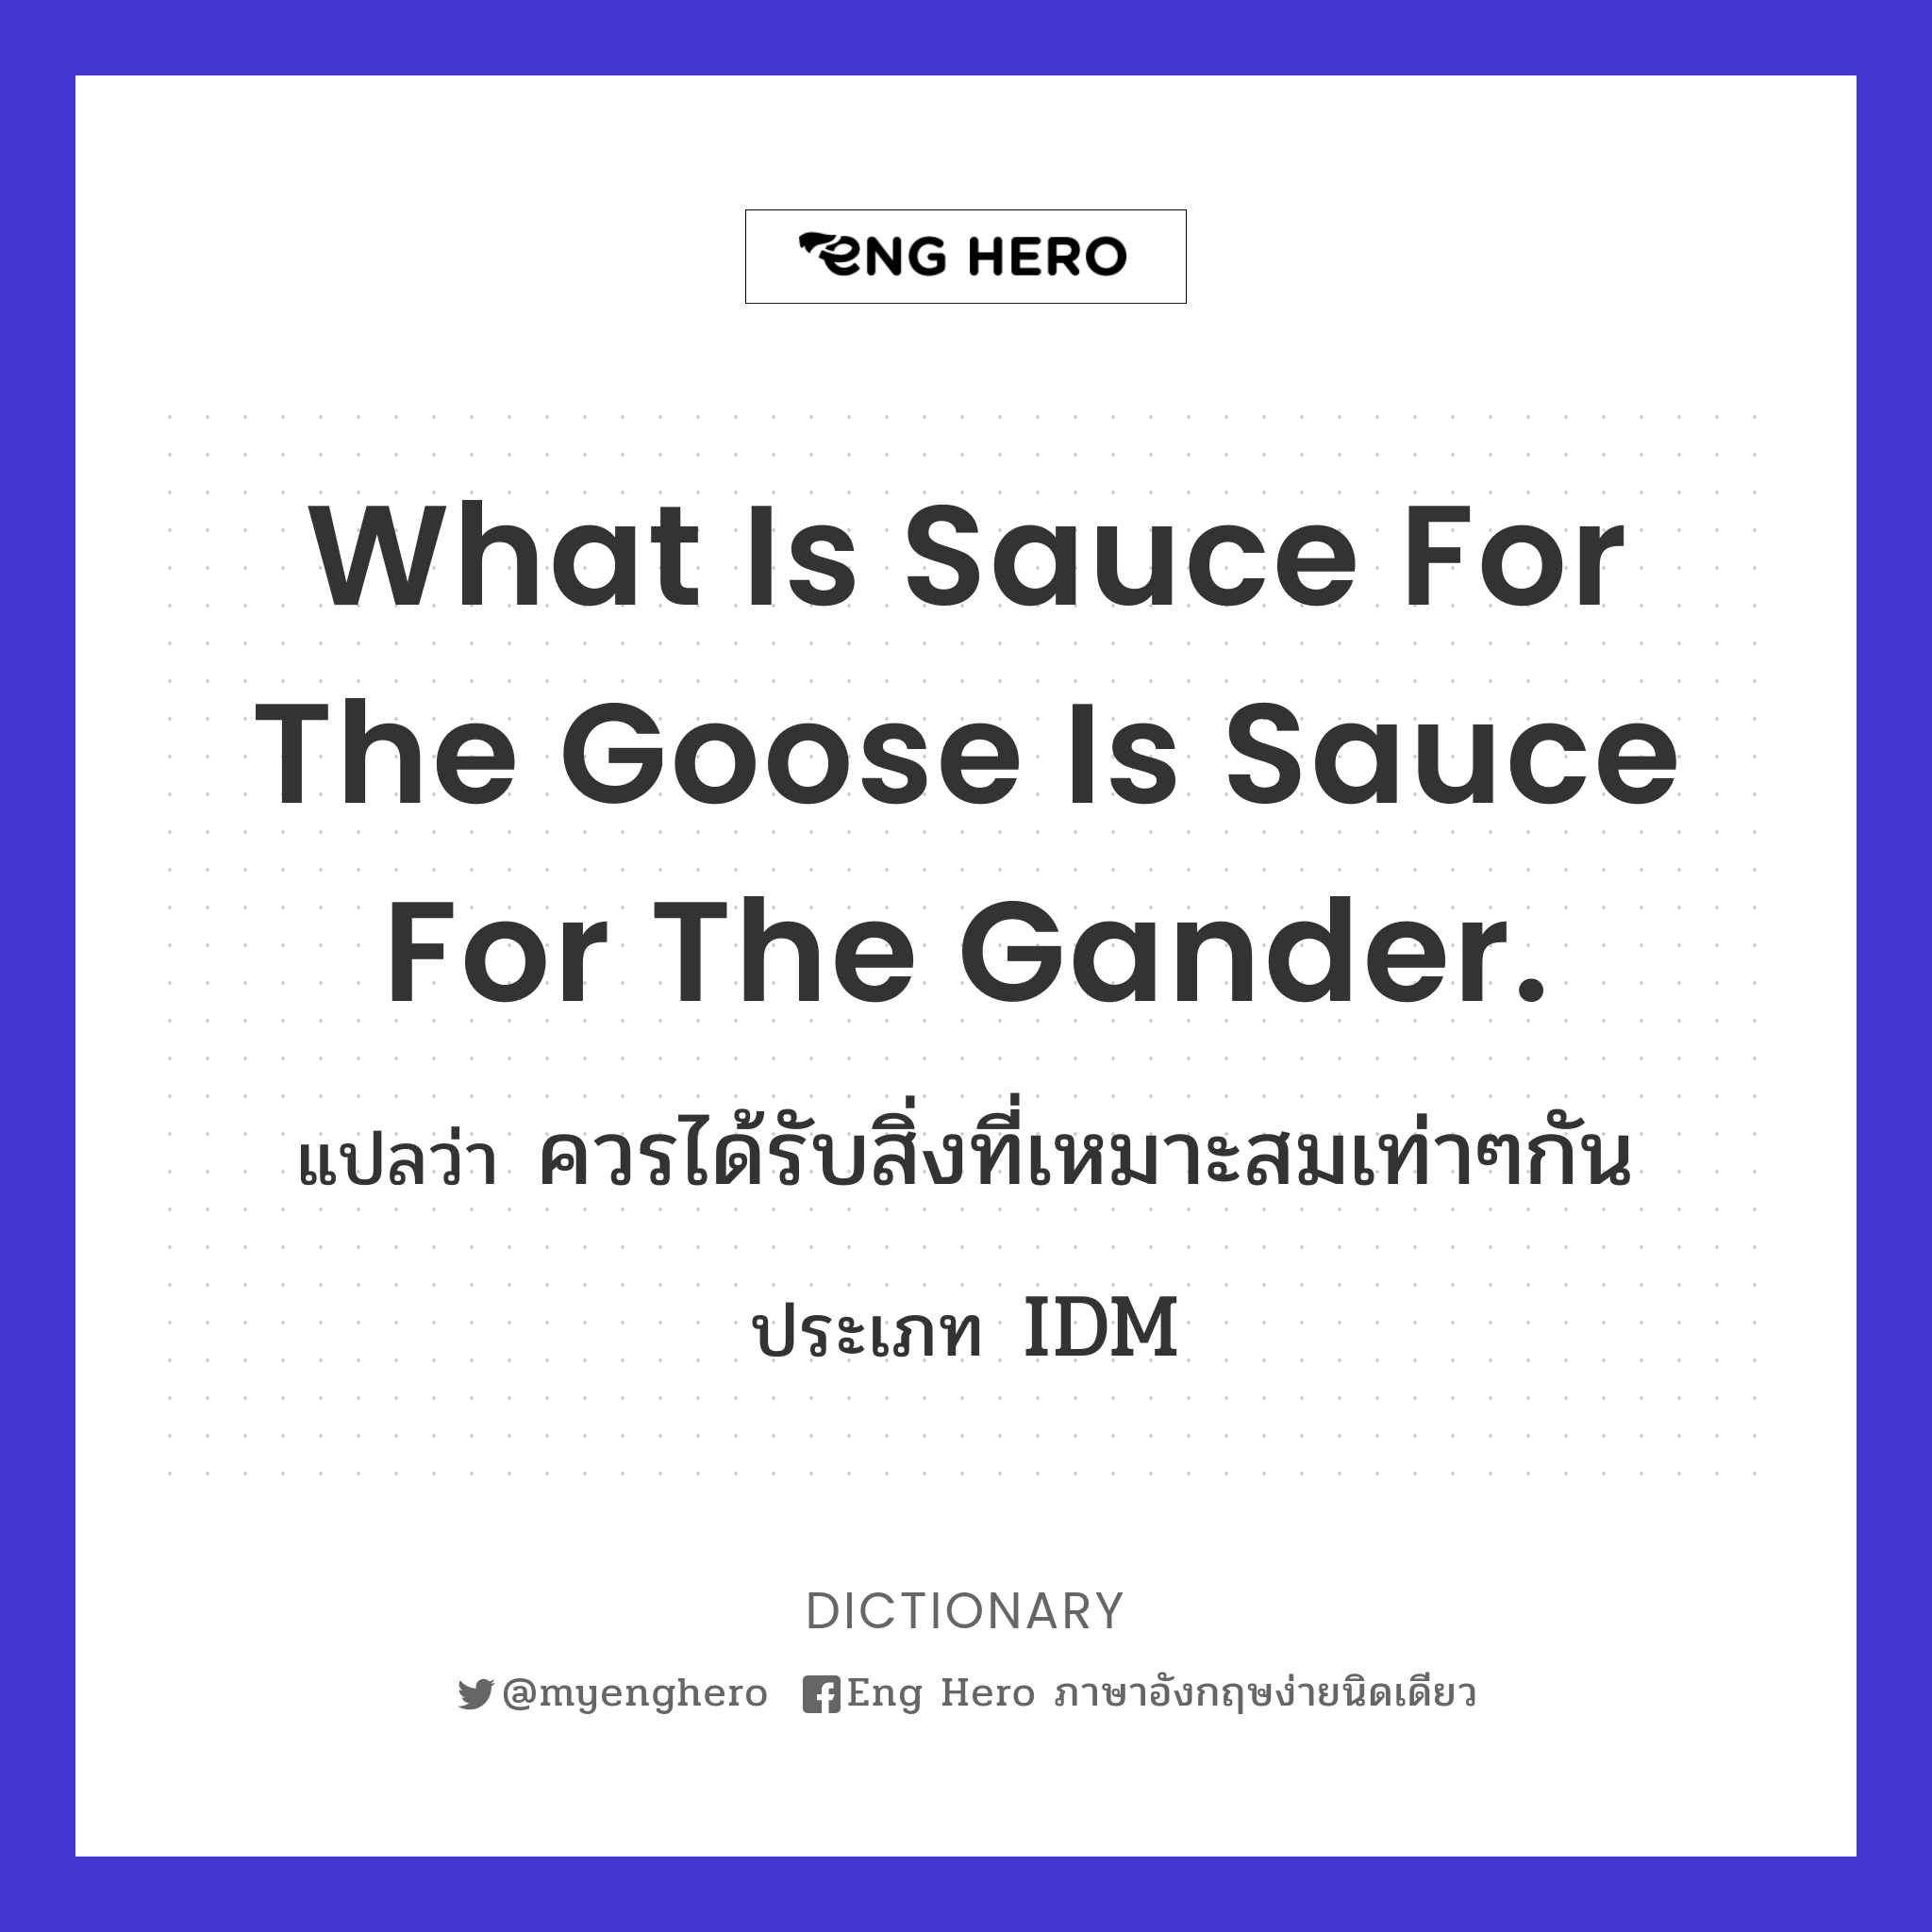 What is sauce for the goose is sauce for the gander.